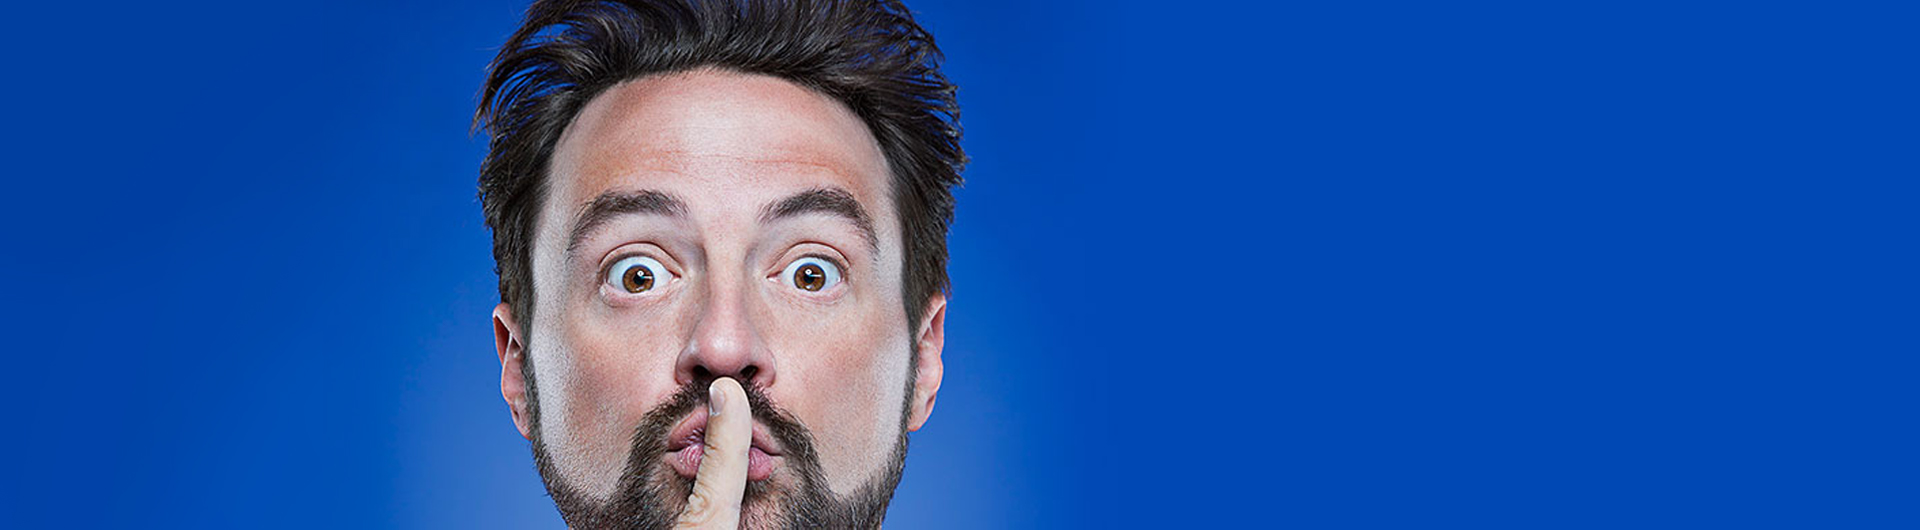 An Evening With Kevin Smith